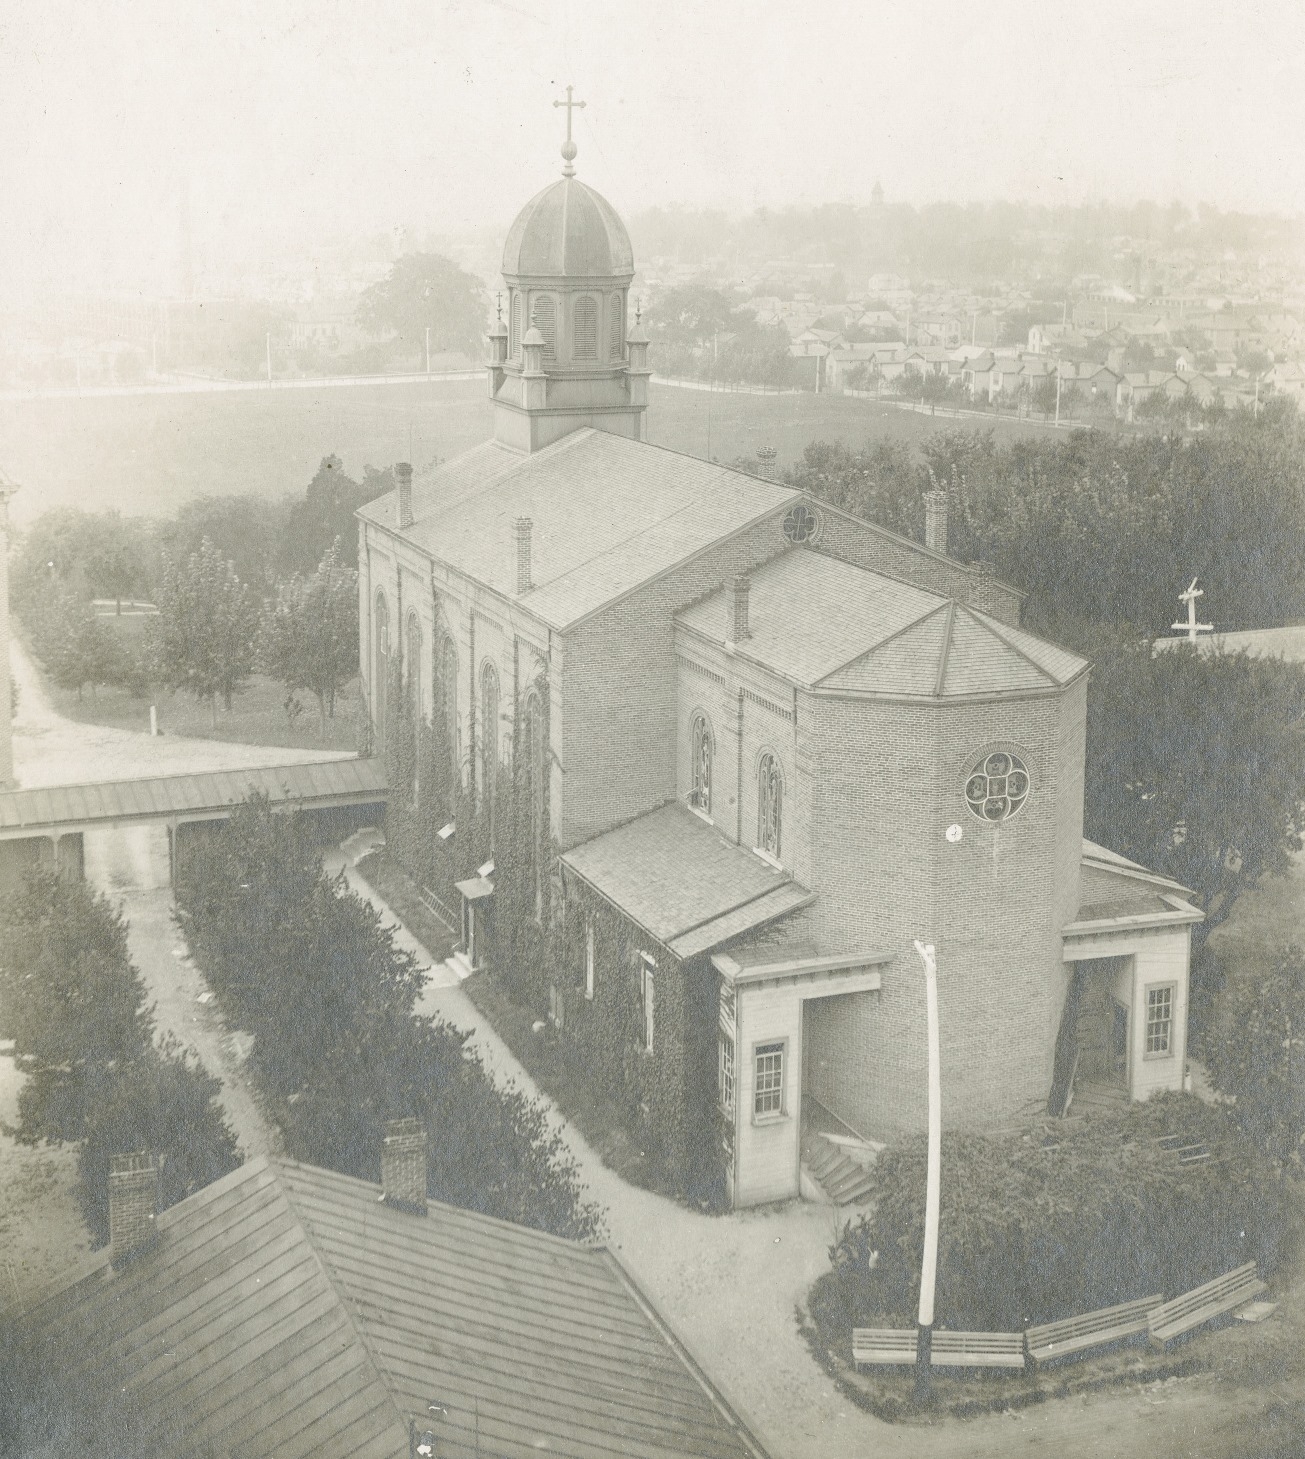 Rear view of the Chapel, 1900.